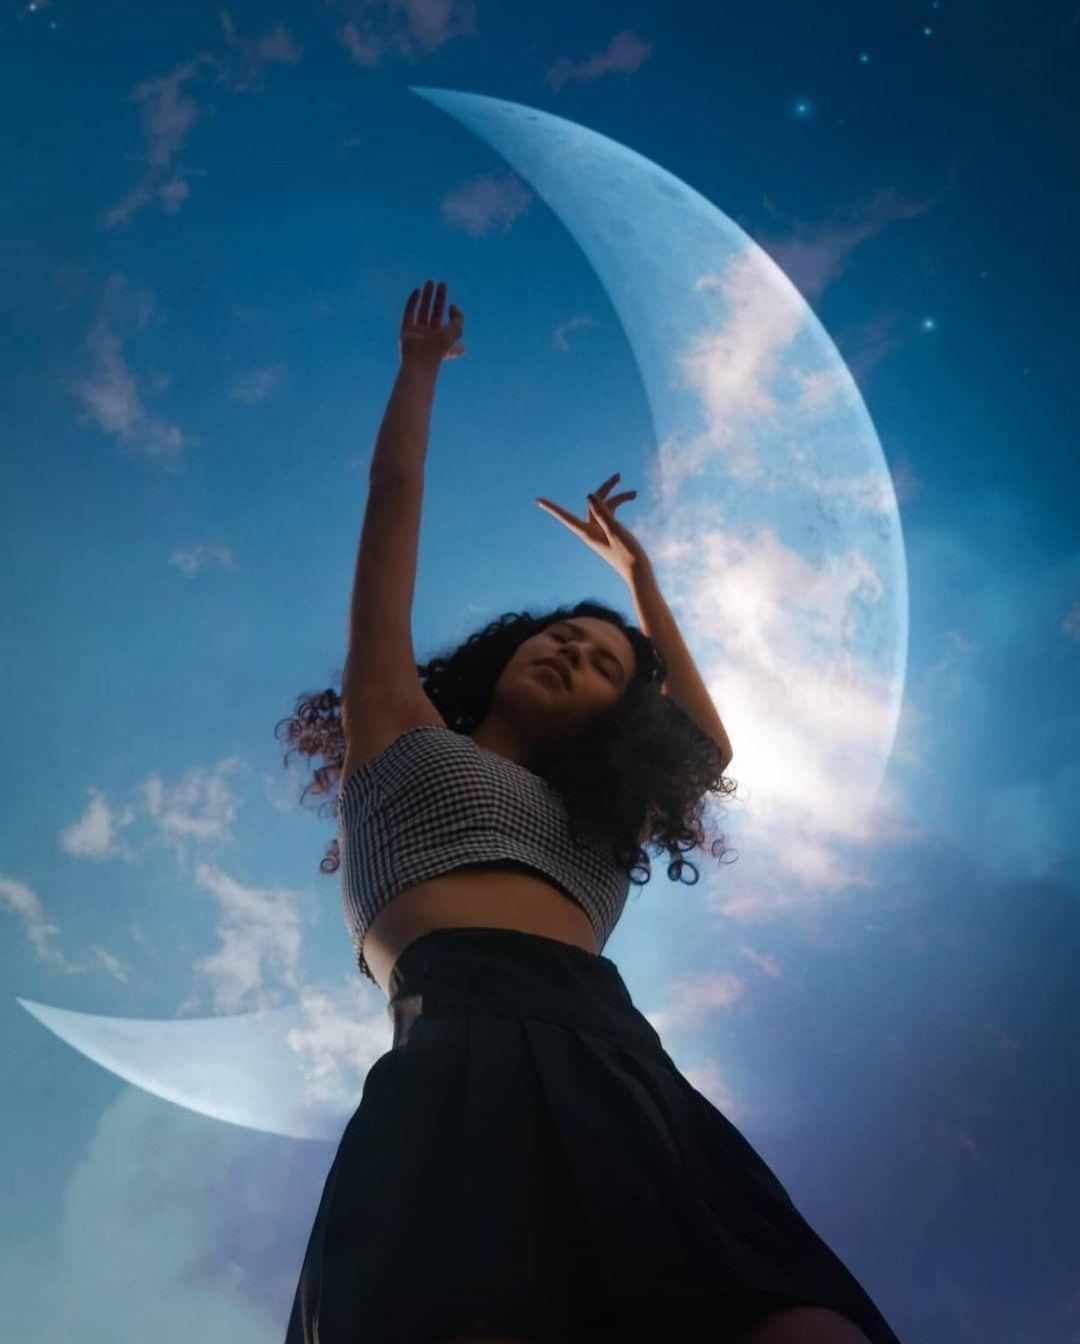 @toriscorzza transforming something ordinary into aesthetic heaven! Swipe for tutorial.✨

Get this look with a moon sticker, make sure you use a Blend mode and our Erase tool. ⁠
⁠
#madeinpicsart #picsartedit #heypicsart #picsarttutorial #moonandback #howtopose #poseideas